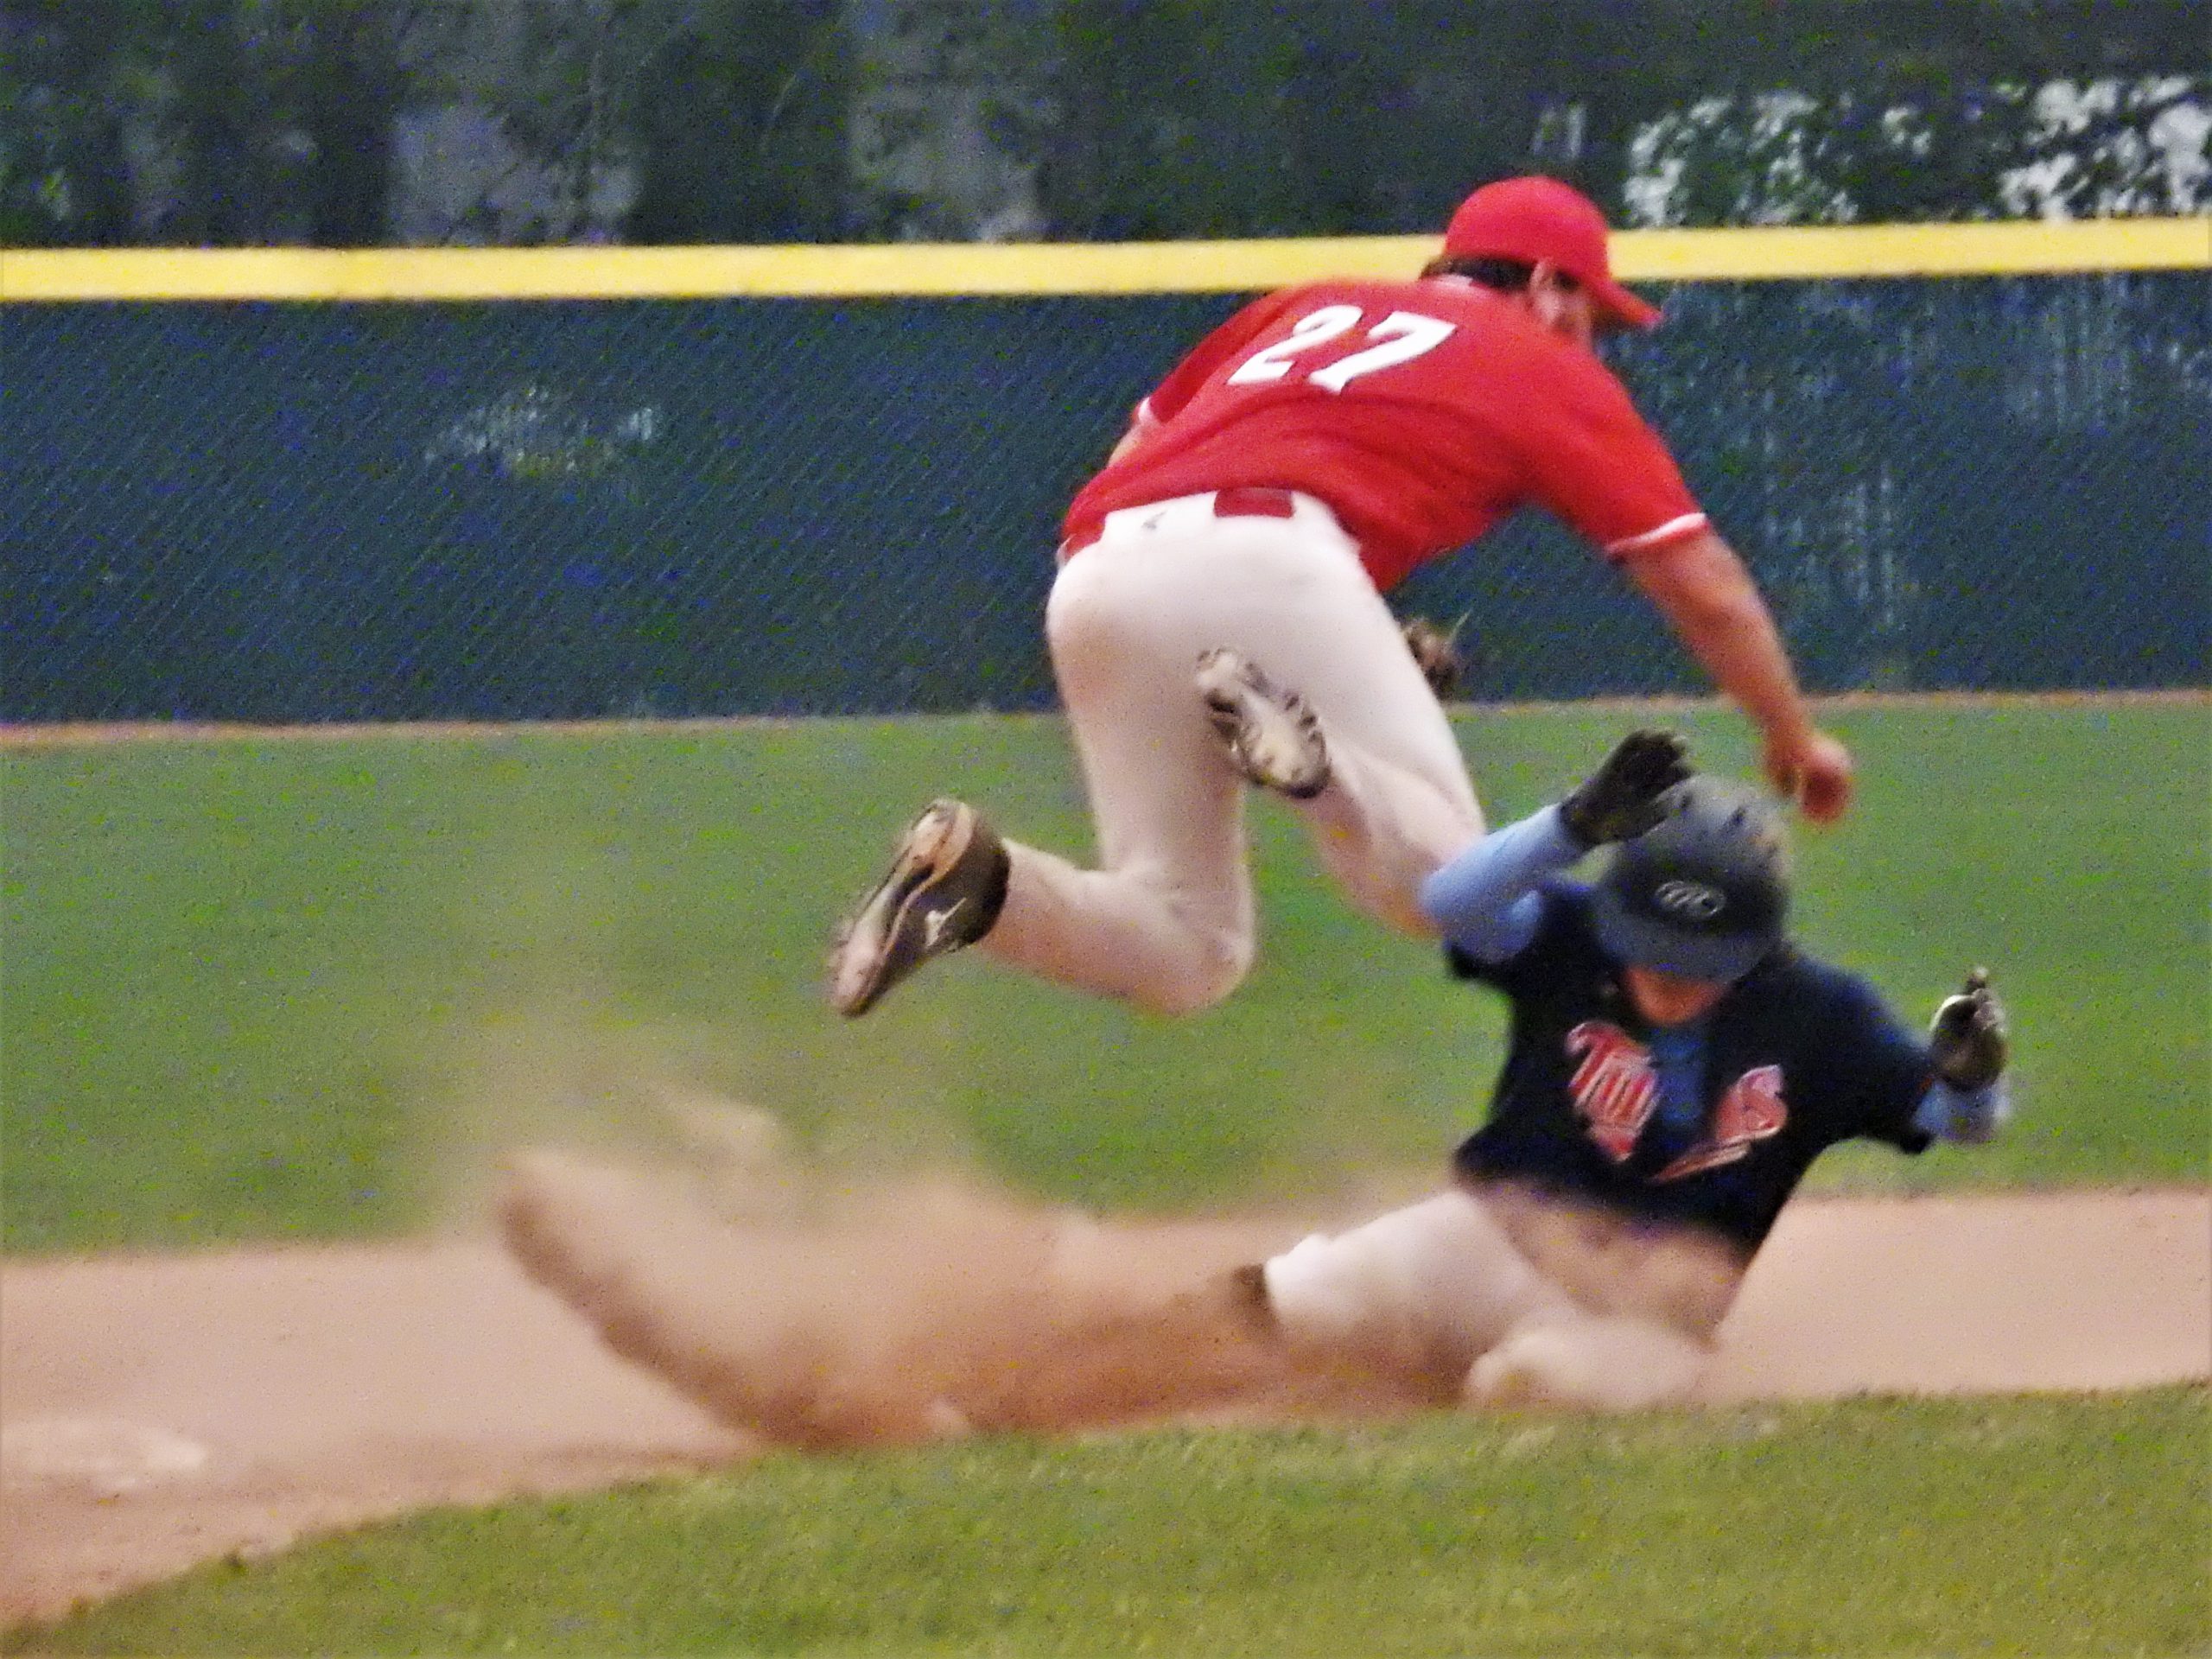 Breakin-up-the-double-play